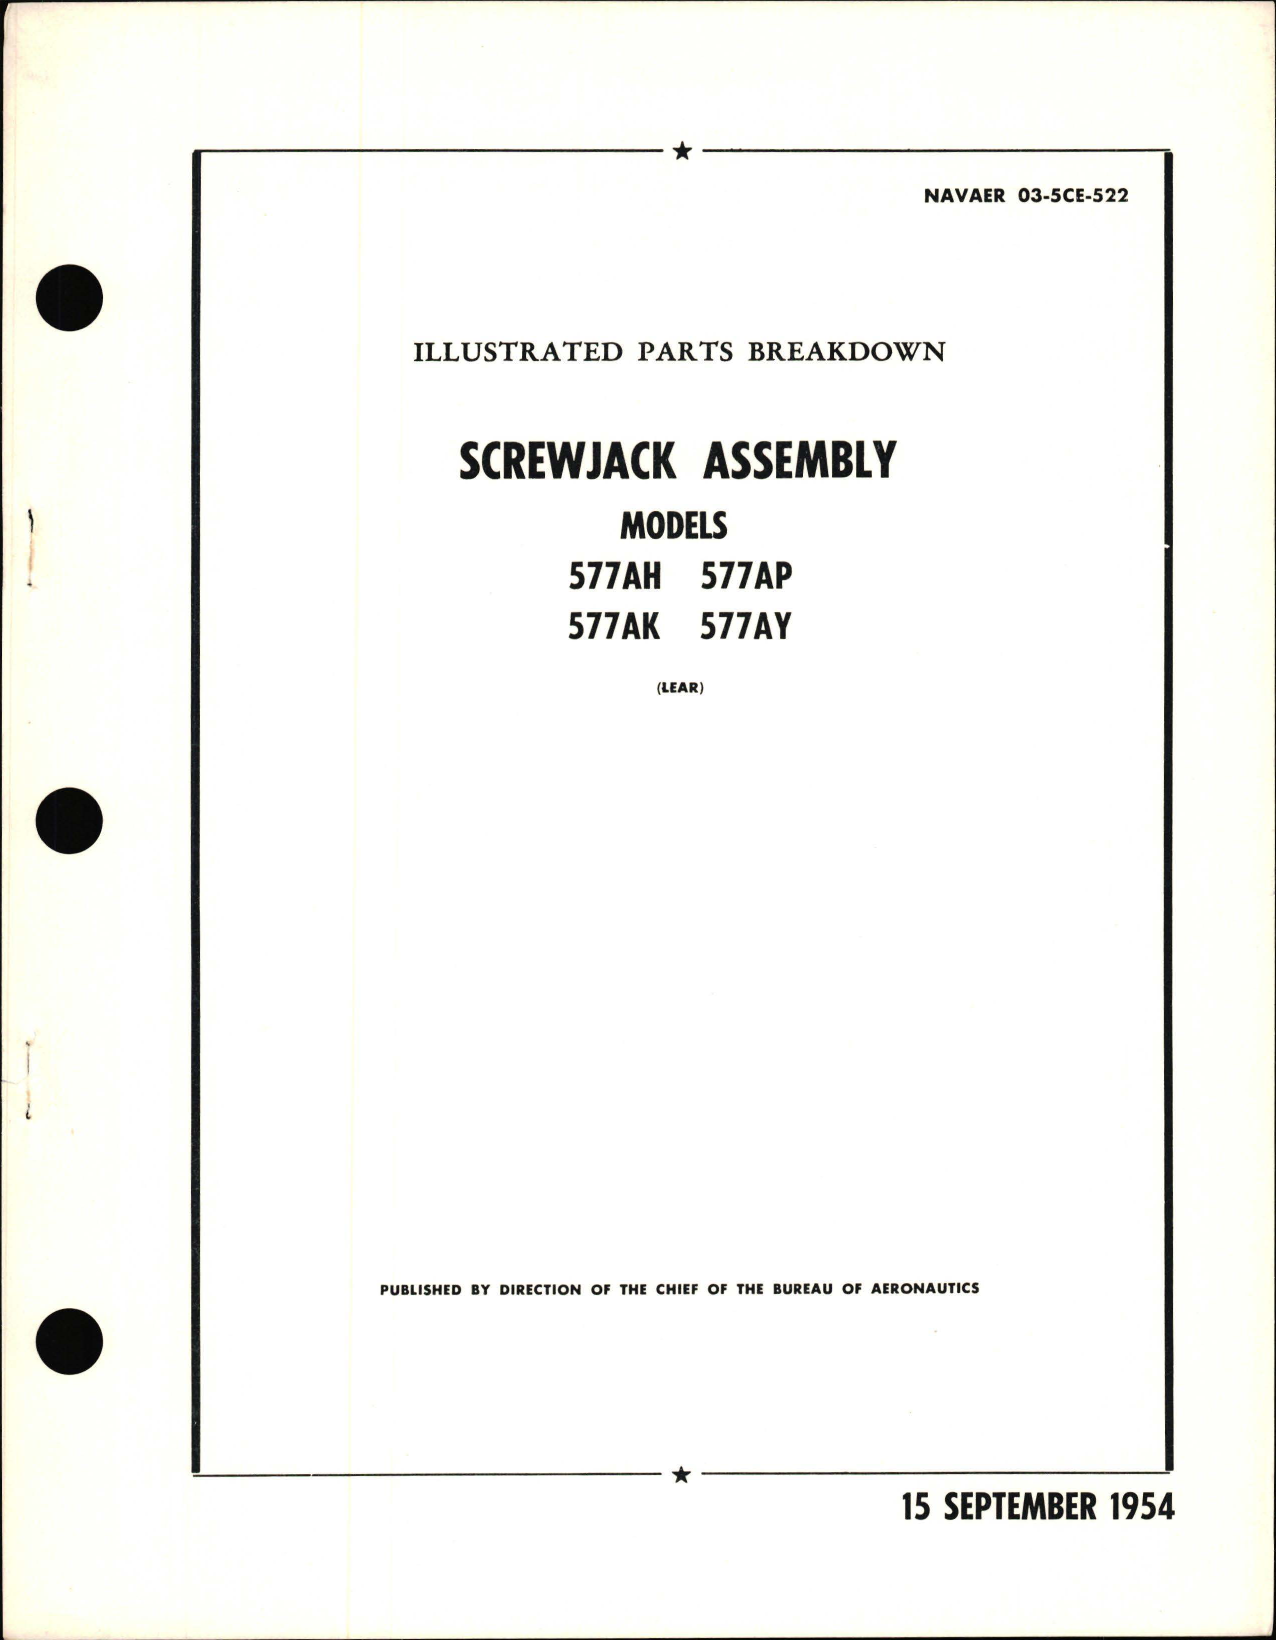 Sample page 1 from AirCorps Library document: Illustrated Parts Breakdown for Screwjack Assembly - Models 577AH, 577AK, 577AP and 577AY 